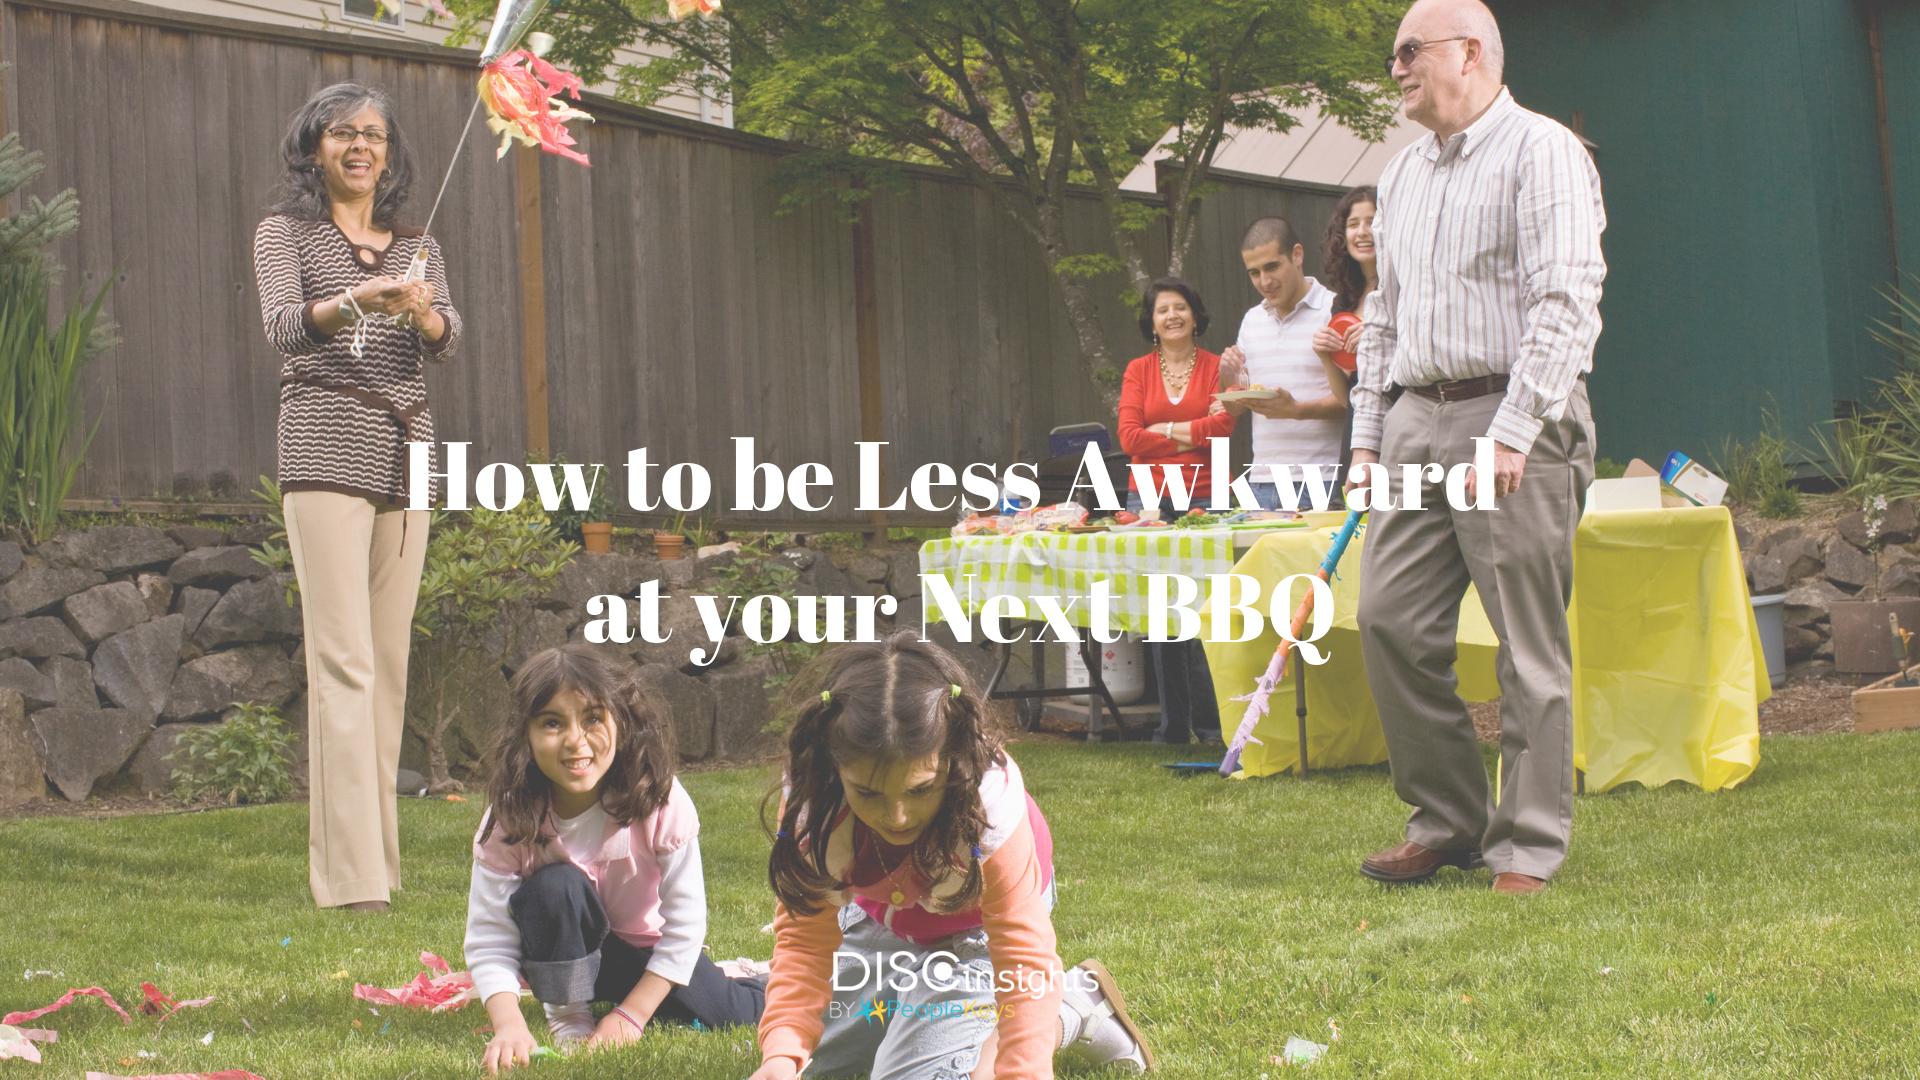 How to be Less Awkward at your Next BBQ